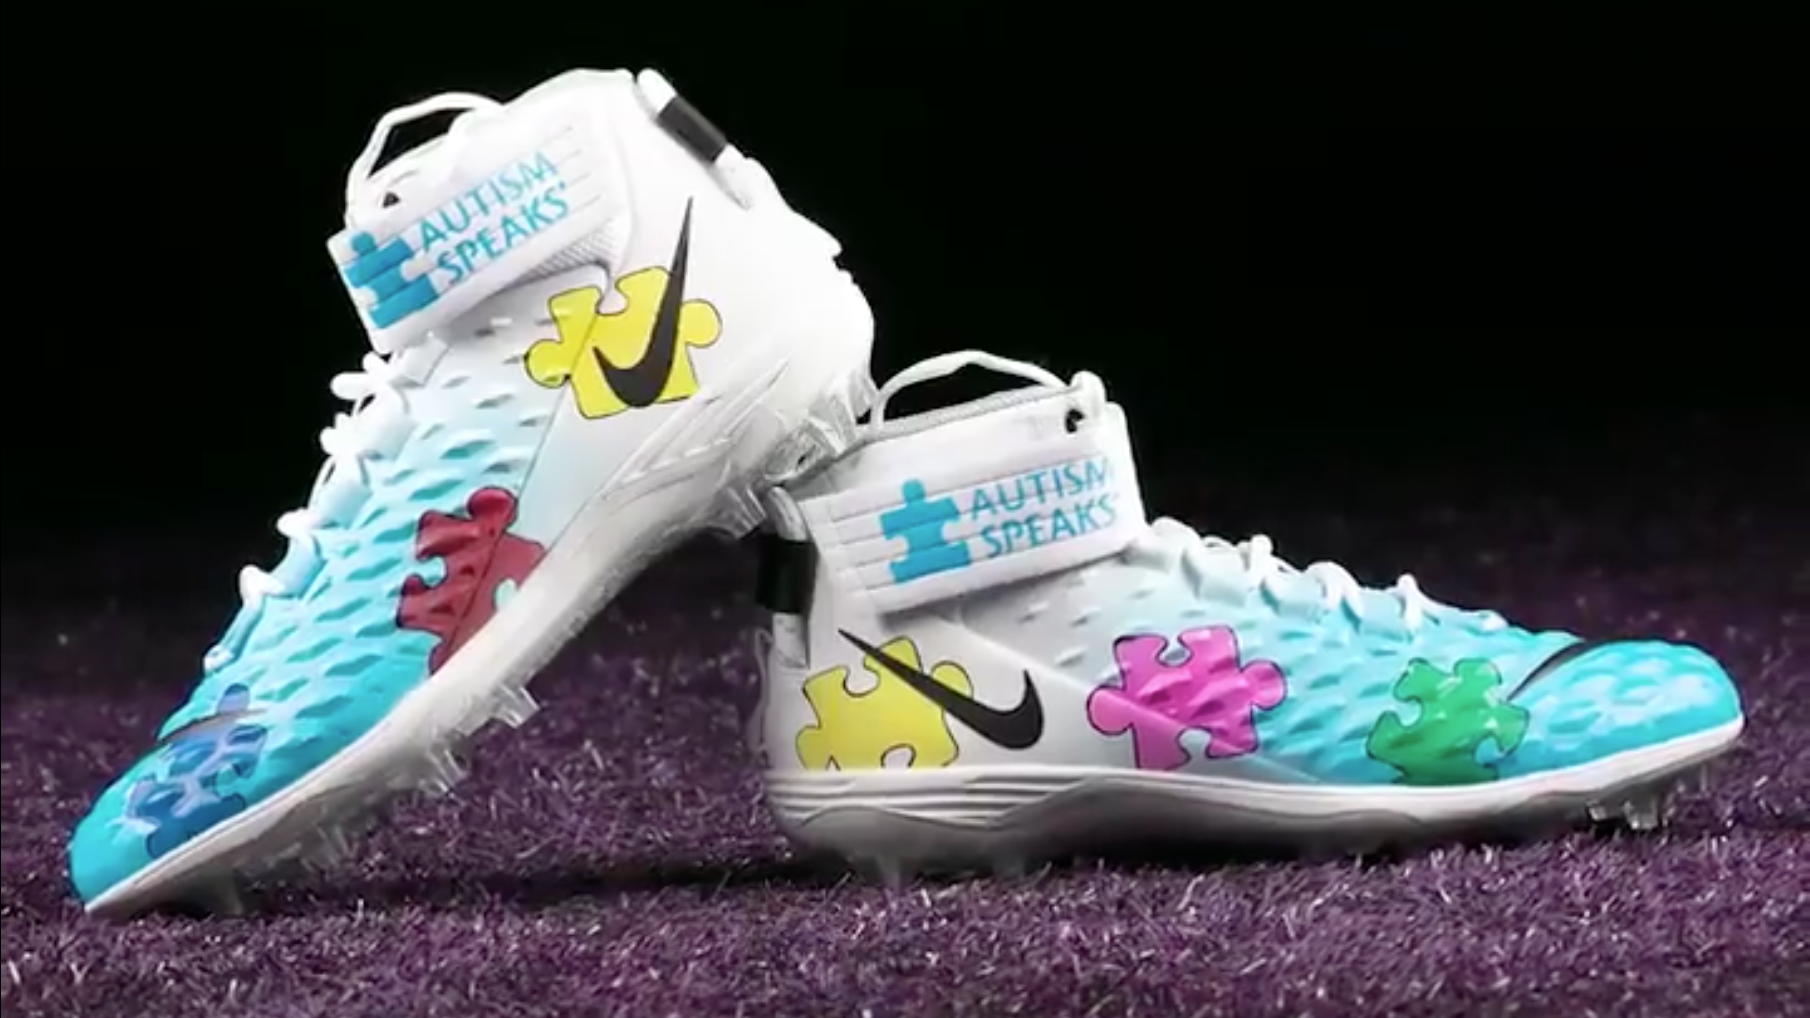 NFL players' cleats for a cause